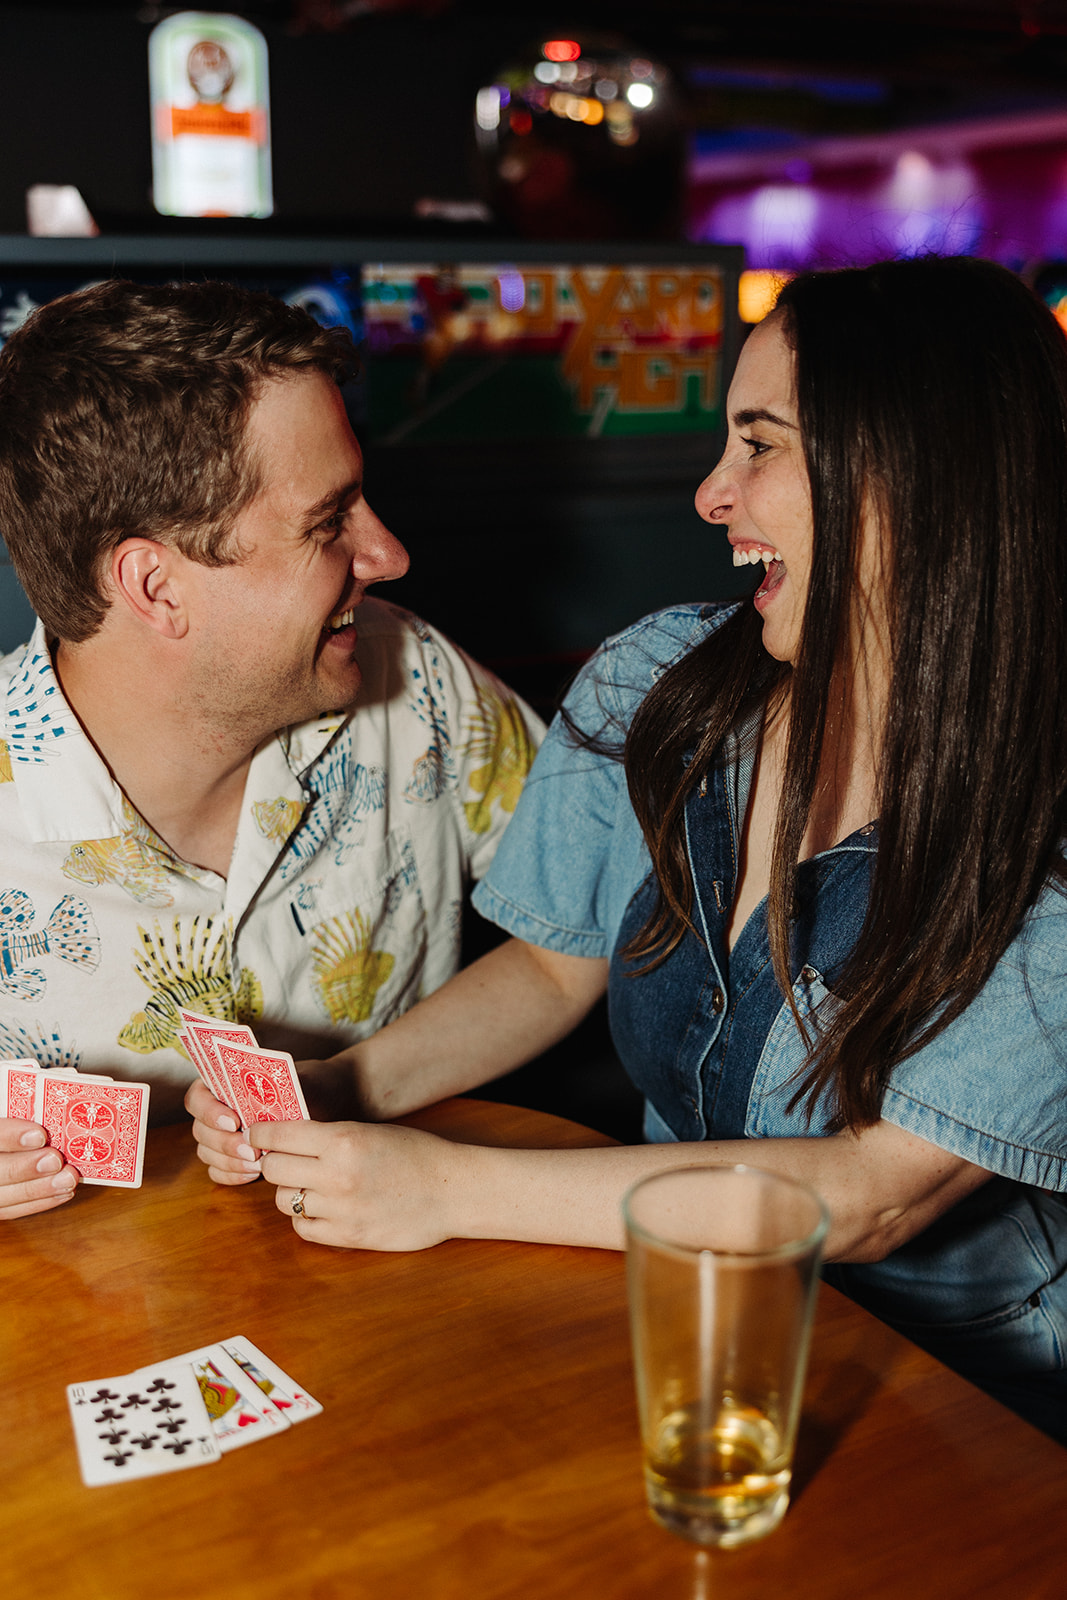 Couple laughing while they play cards and enjoy drinks at their arcade engagement photo shoot